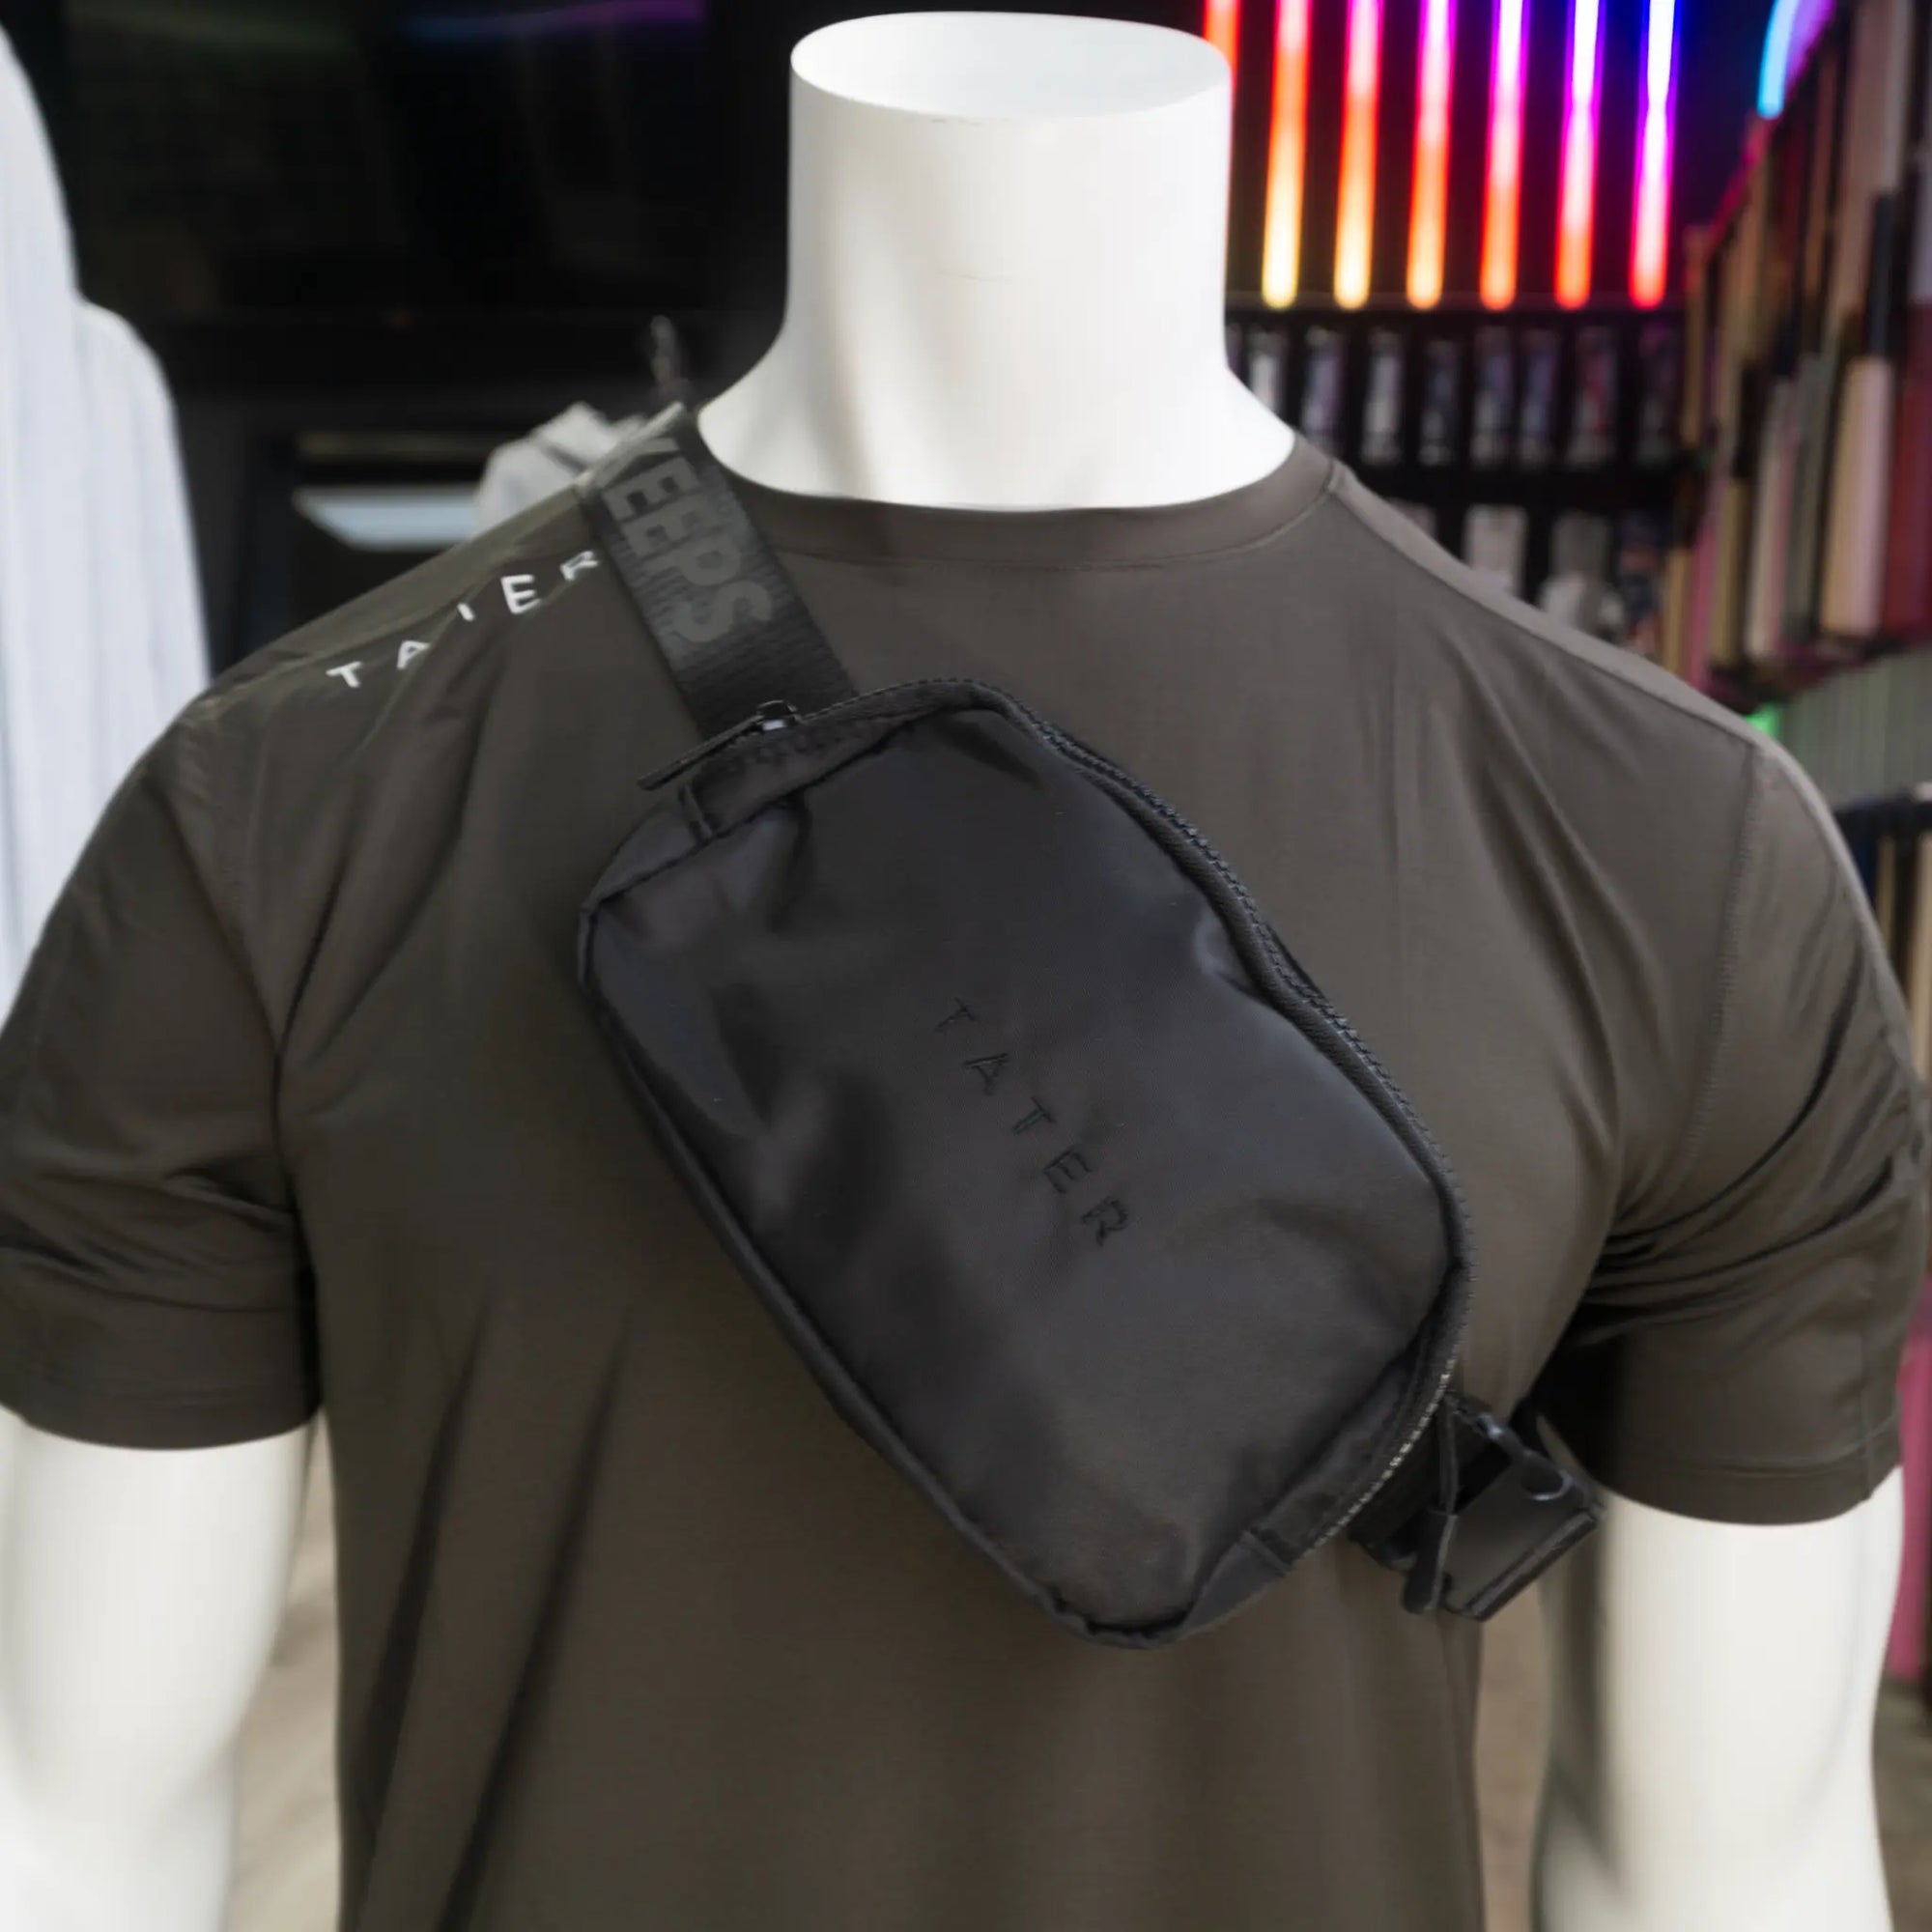 The image displays a black crossbody fanny pack with the "Tater" brand prominently embossed on the front. The strap bears a repeated slogan or message that appears to be part of the brand's design, enhancing the product's athletic appeal. The bag's compact size suggests functionality and convenience for carrying essentials, catering to an active lifestyle. 